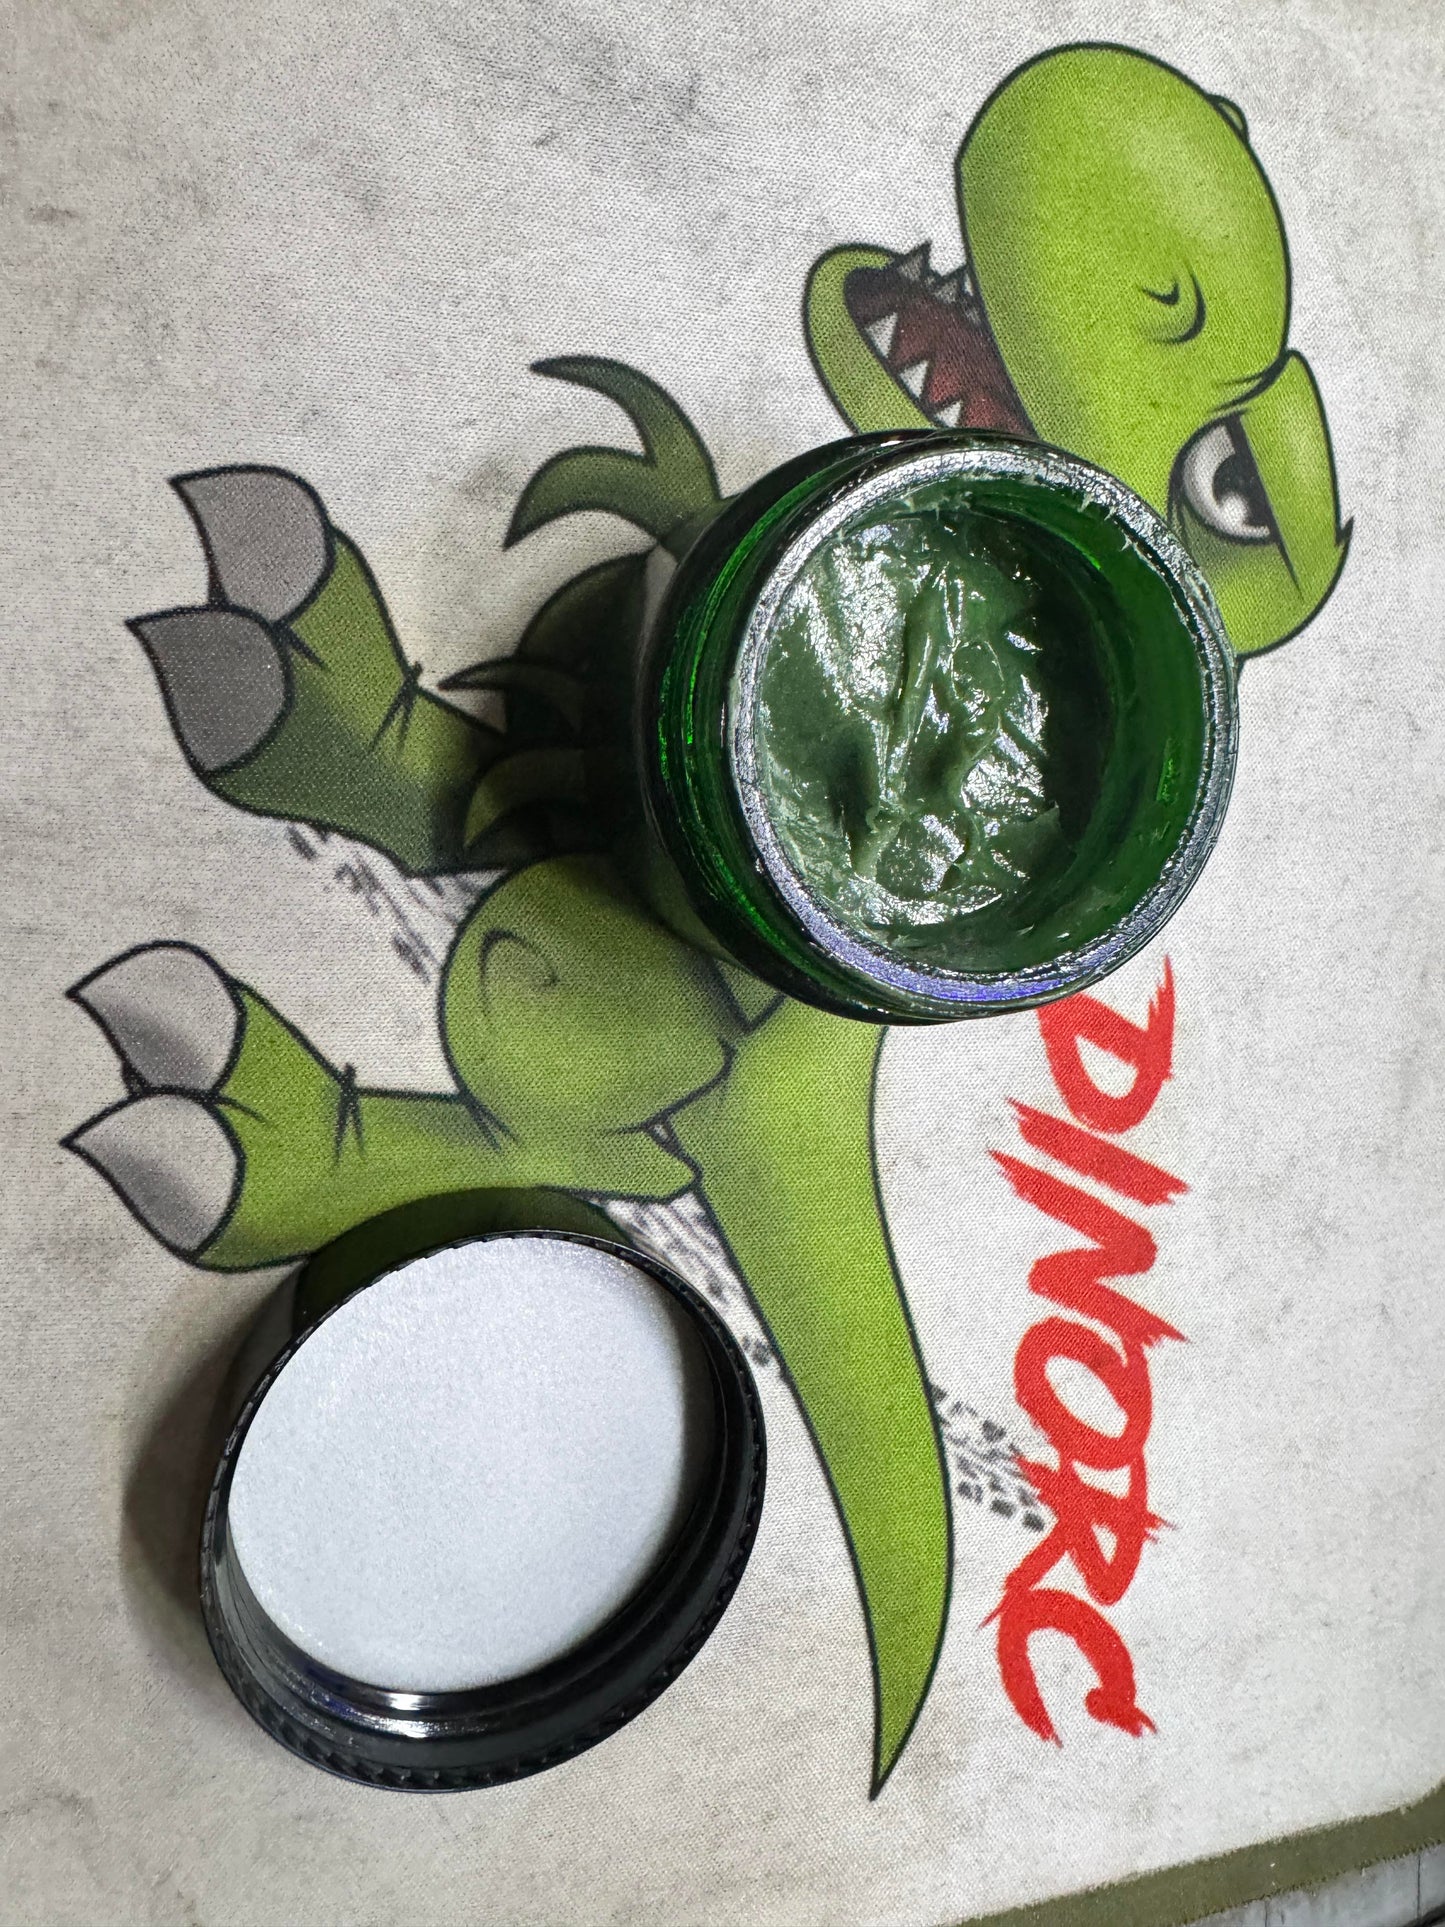 1 Dino Tar Extreme RC Axle Green Grease Kit!